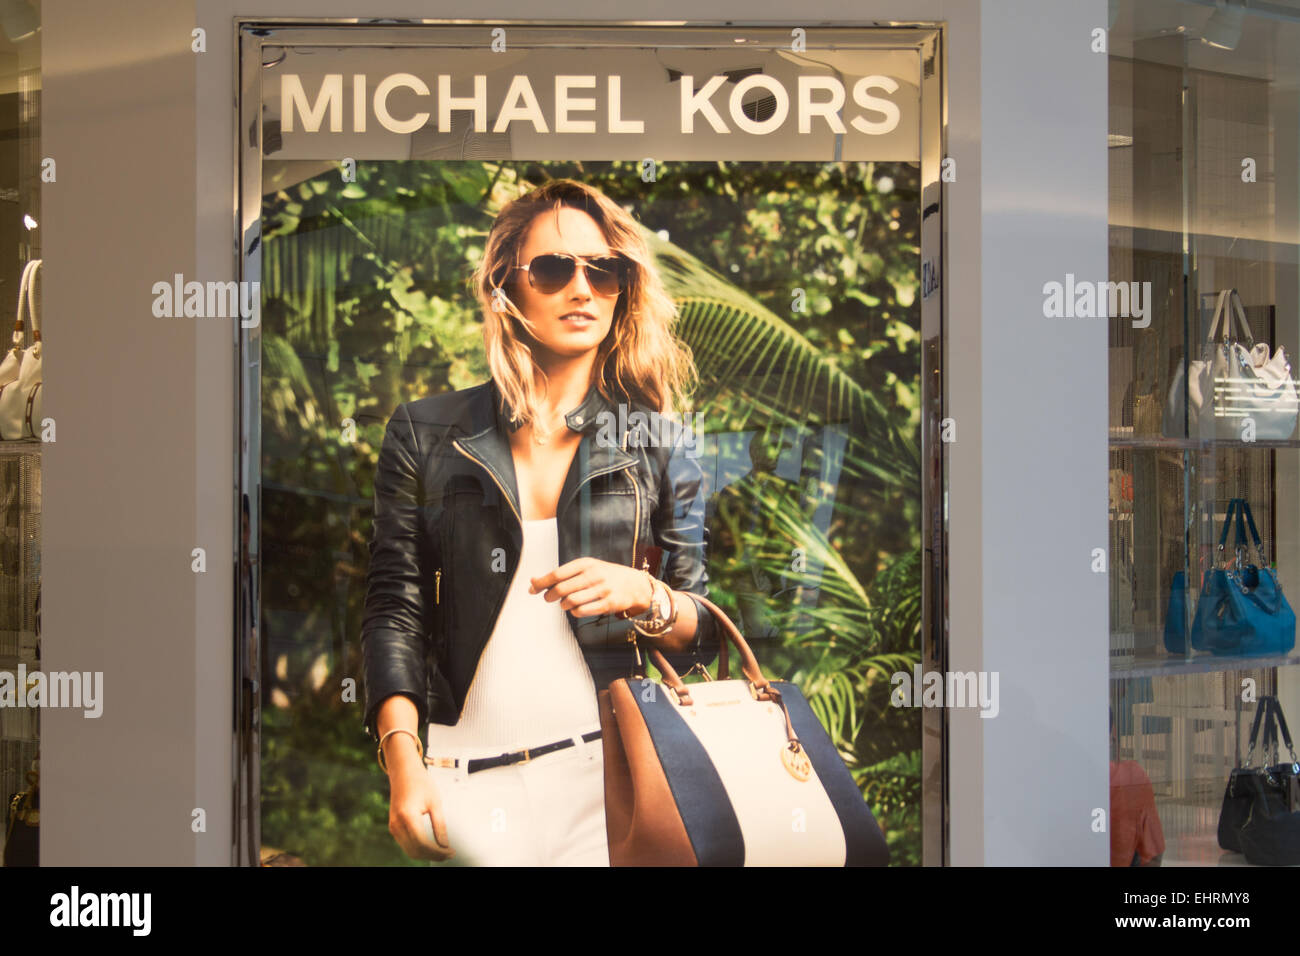 michael kors outlet chicago